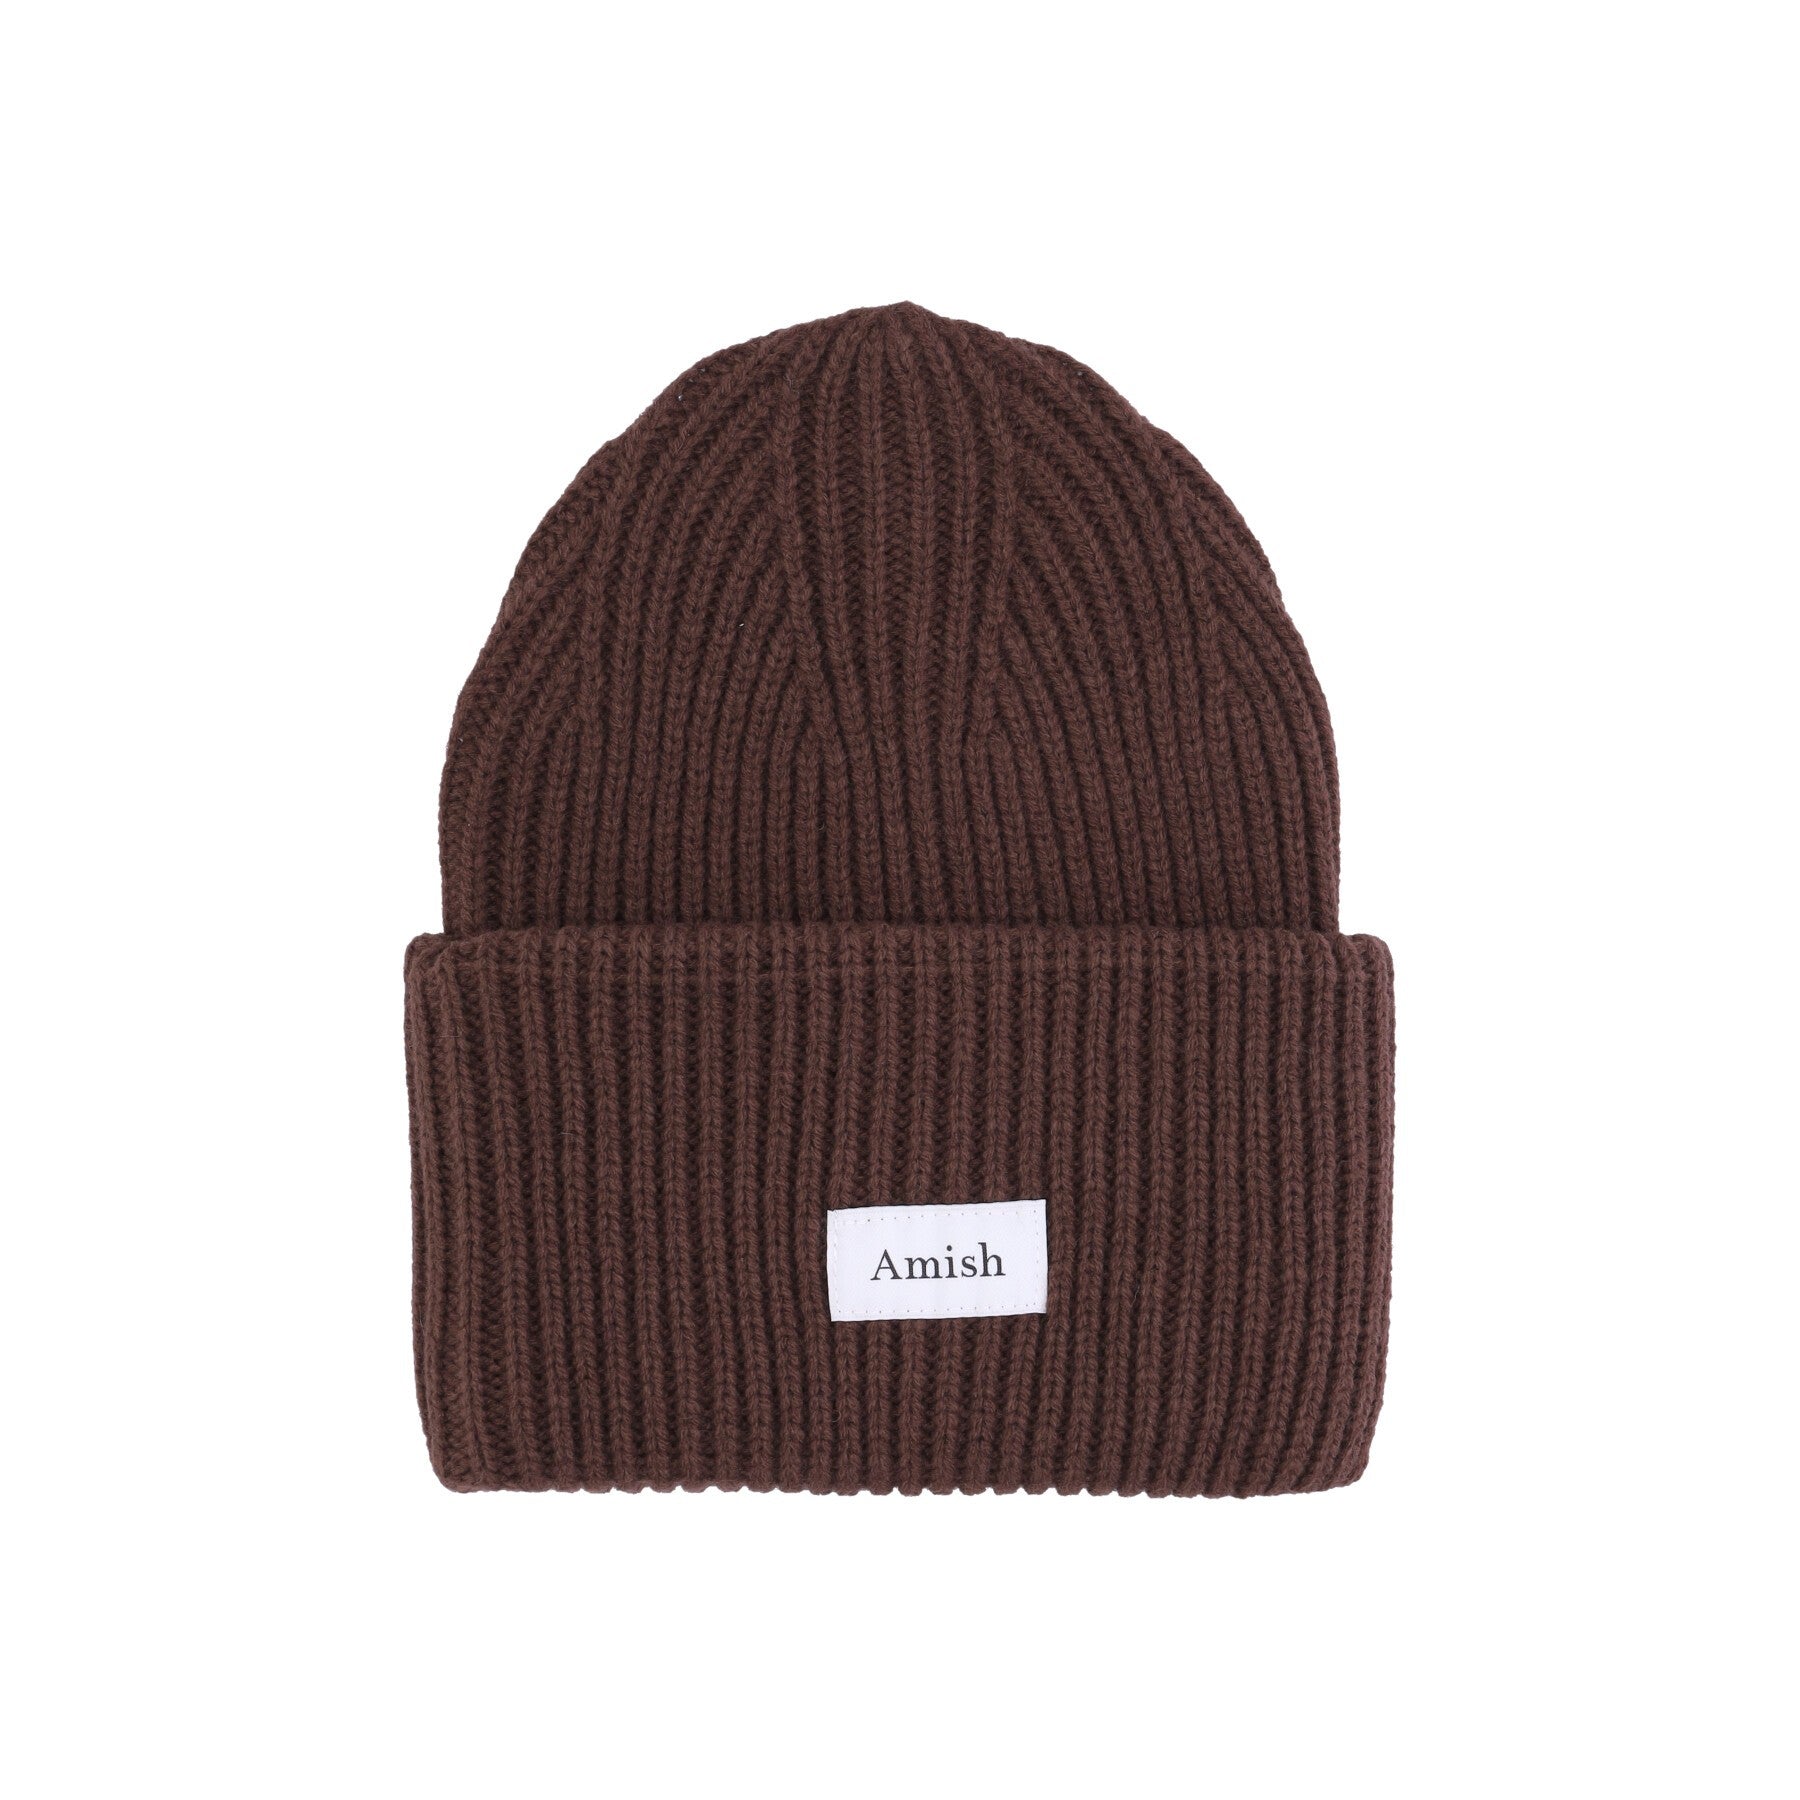 Amish, Cappello Uomo Wool Blend Beanie, Coffee Brown